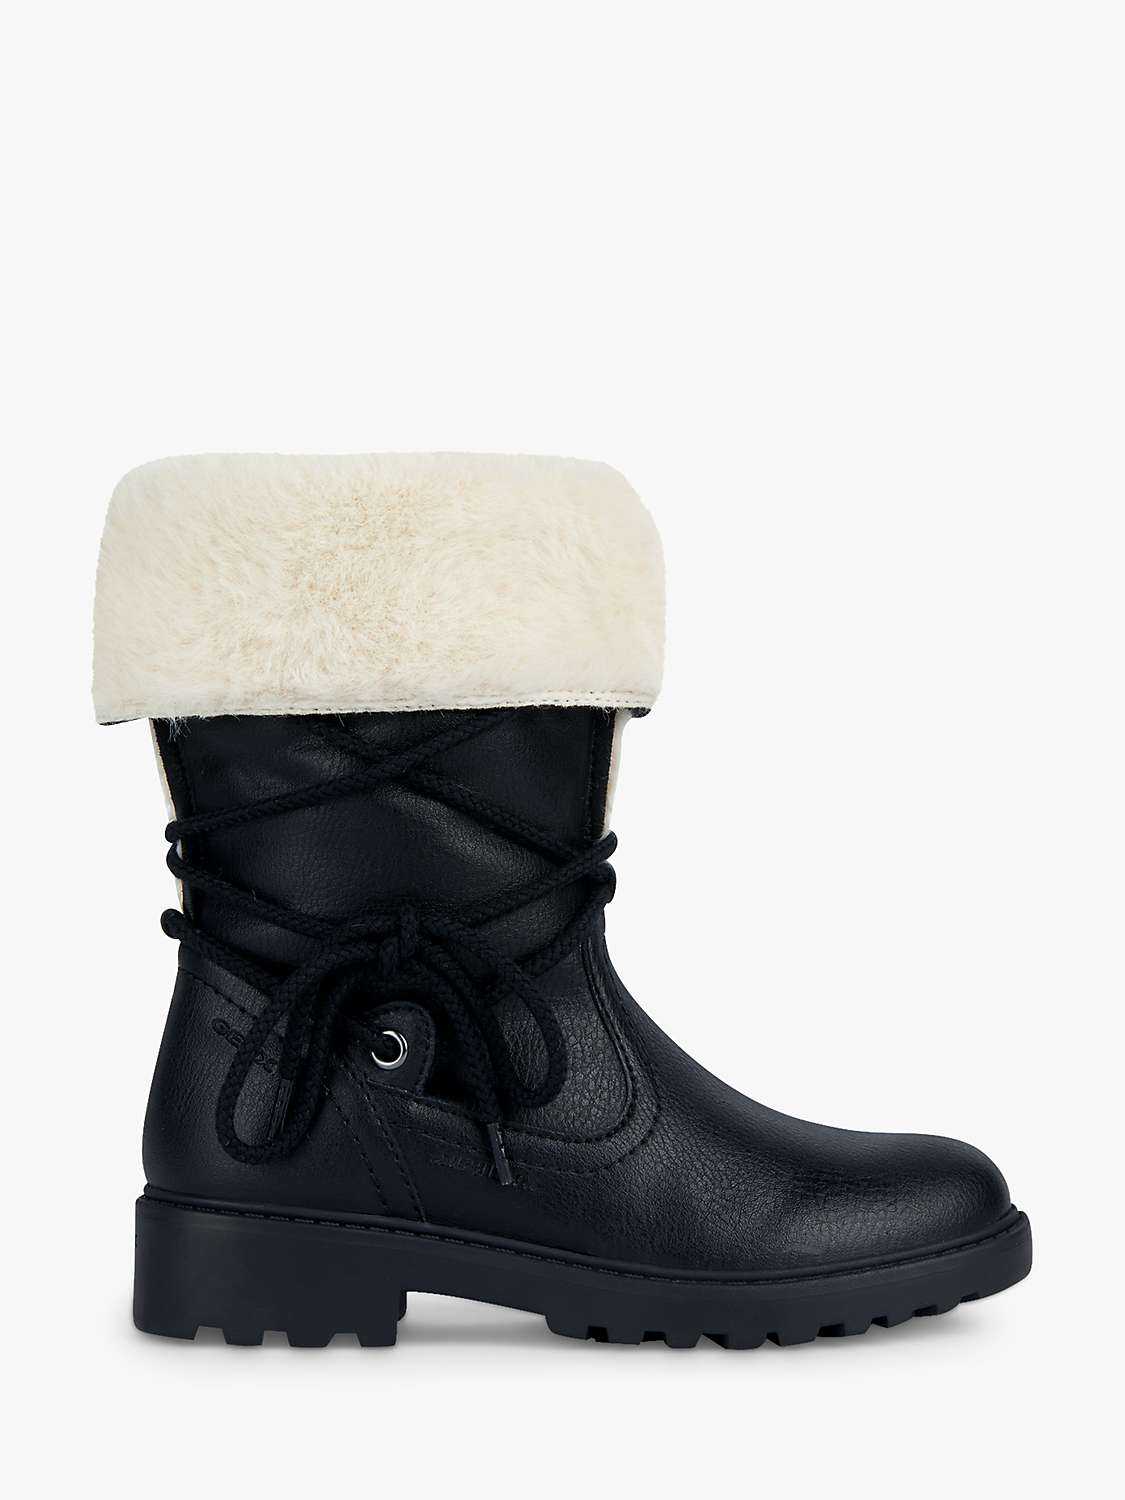 Buy Geox Kids' J Casey ABX Waterproof Faux Leather Boots Online at johnlewis.com